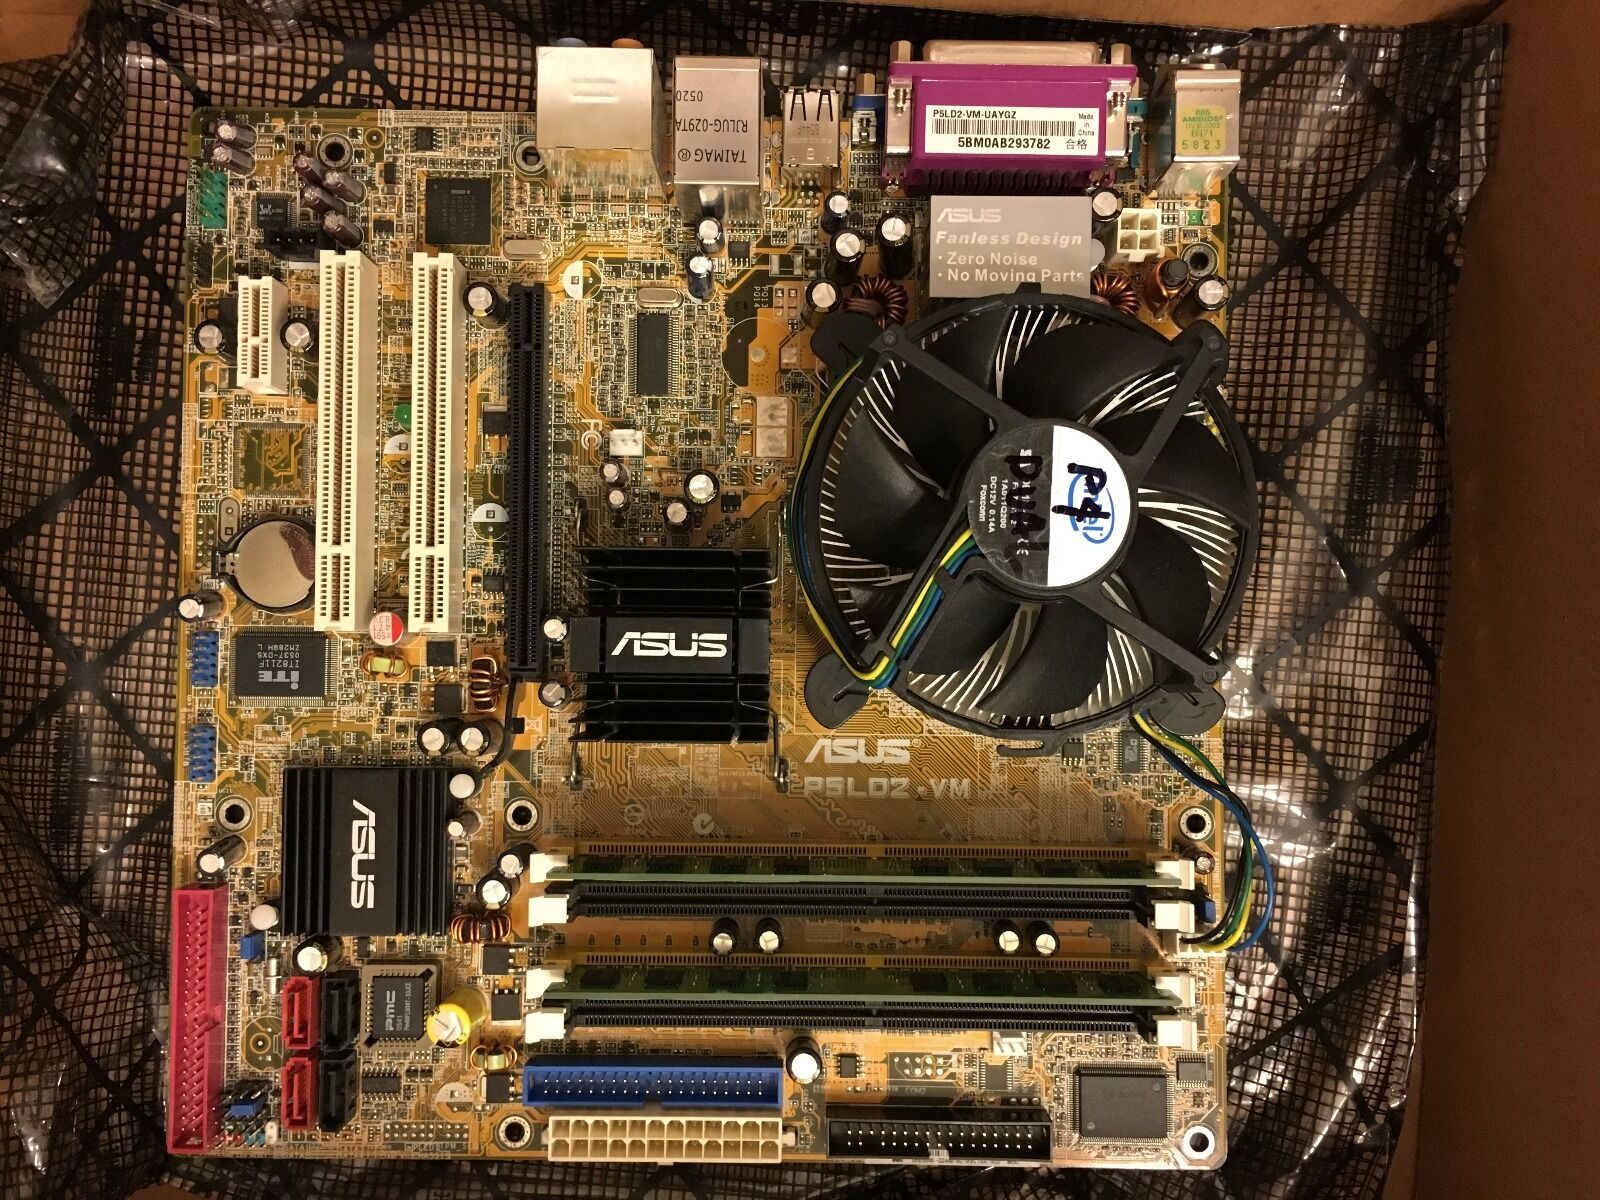 NEW ASUS P5LD2-VM Mother Board + 4G Memory, P4 Dual, Heat Sink Fan and I/O shield